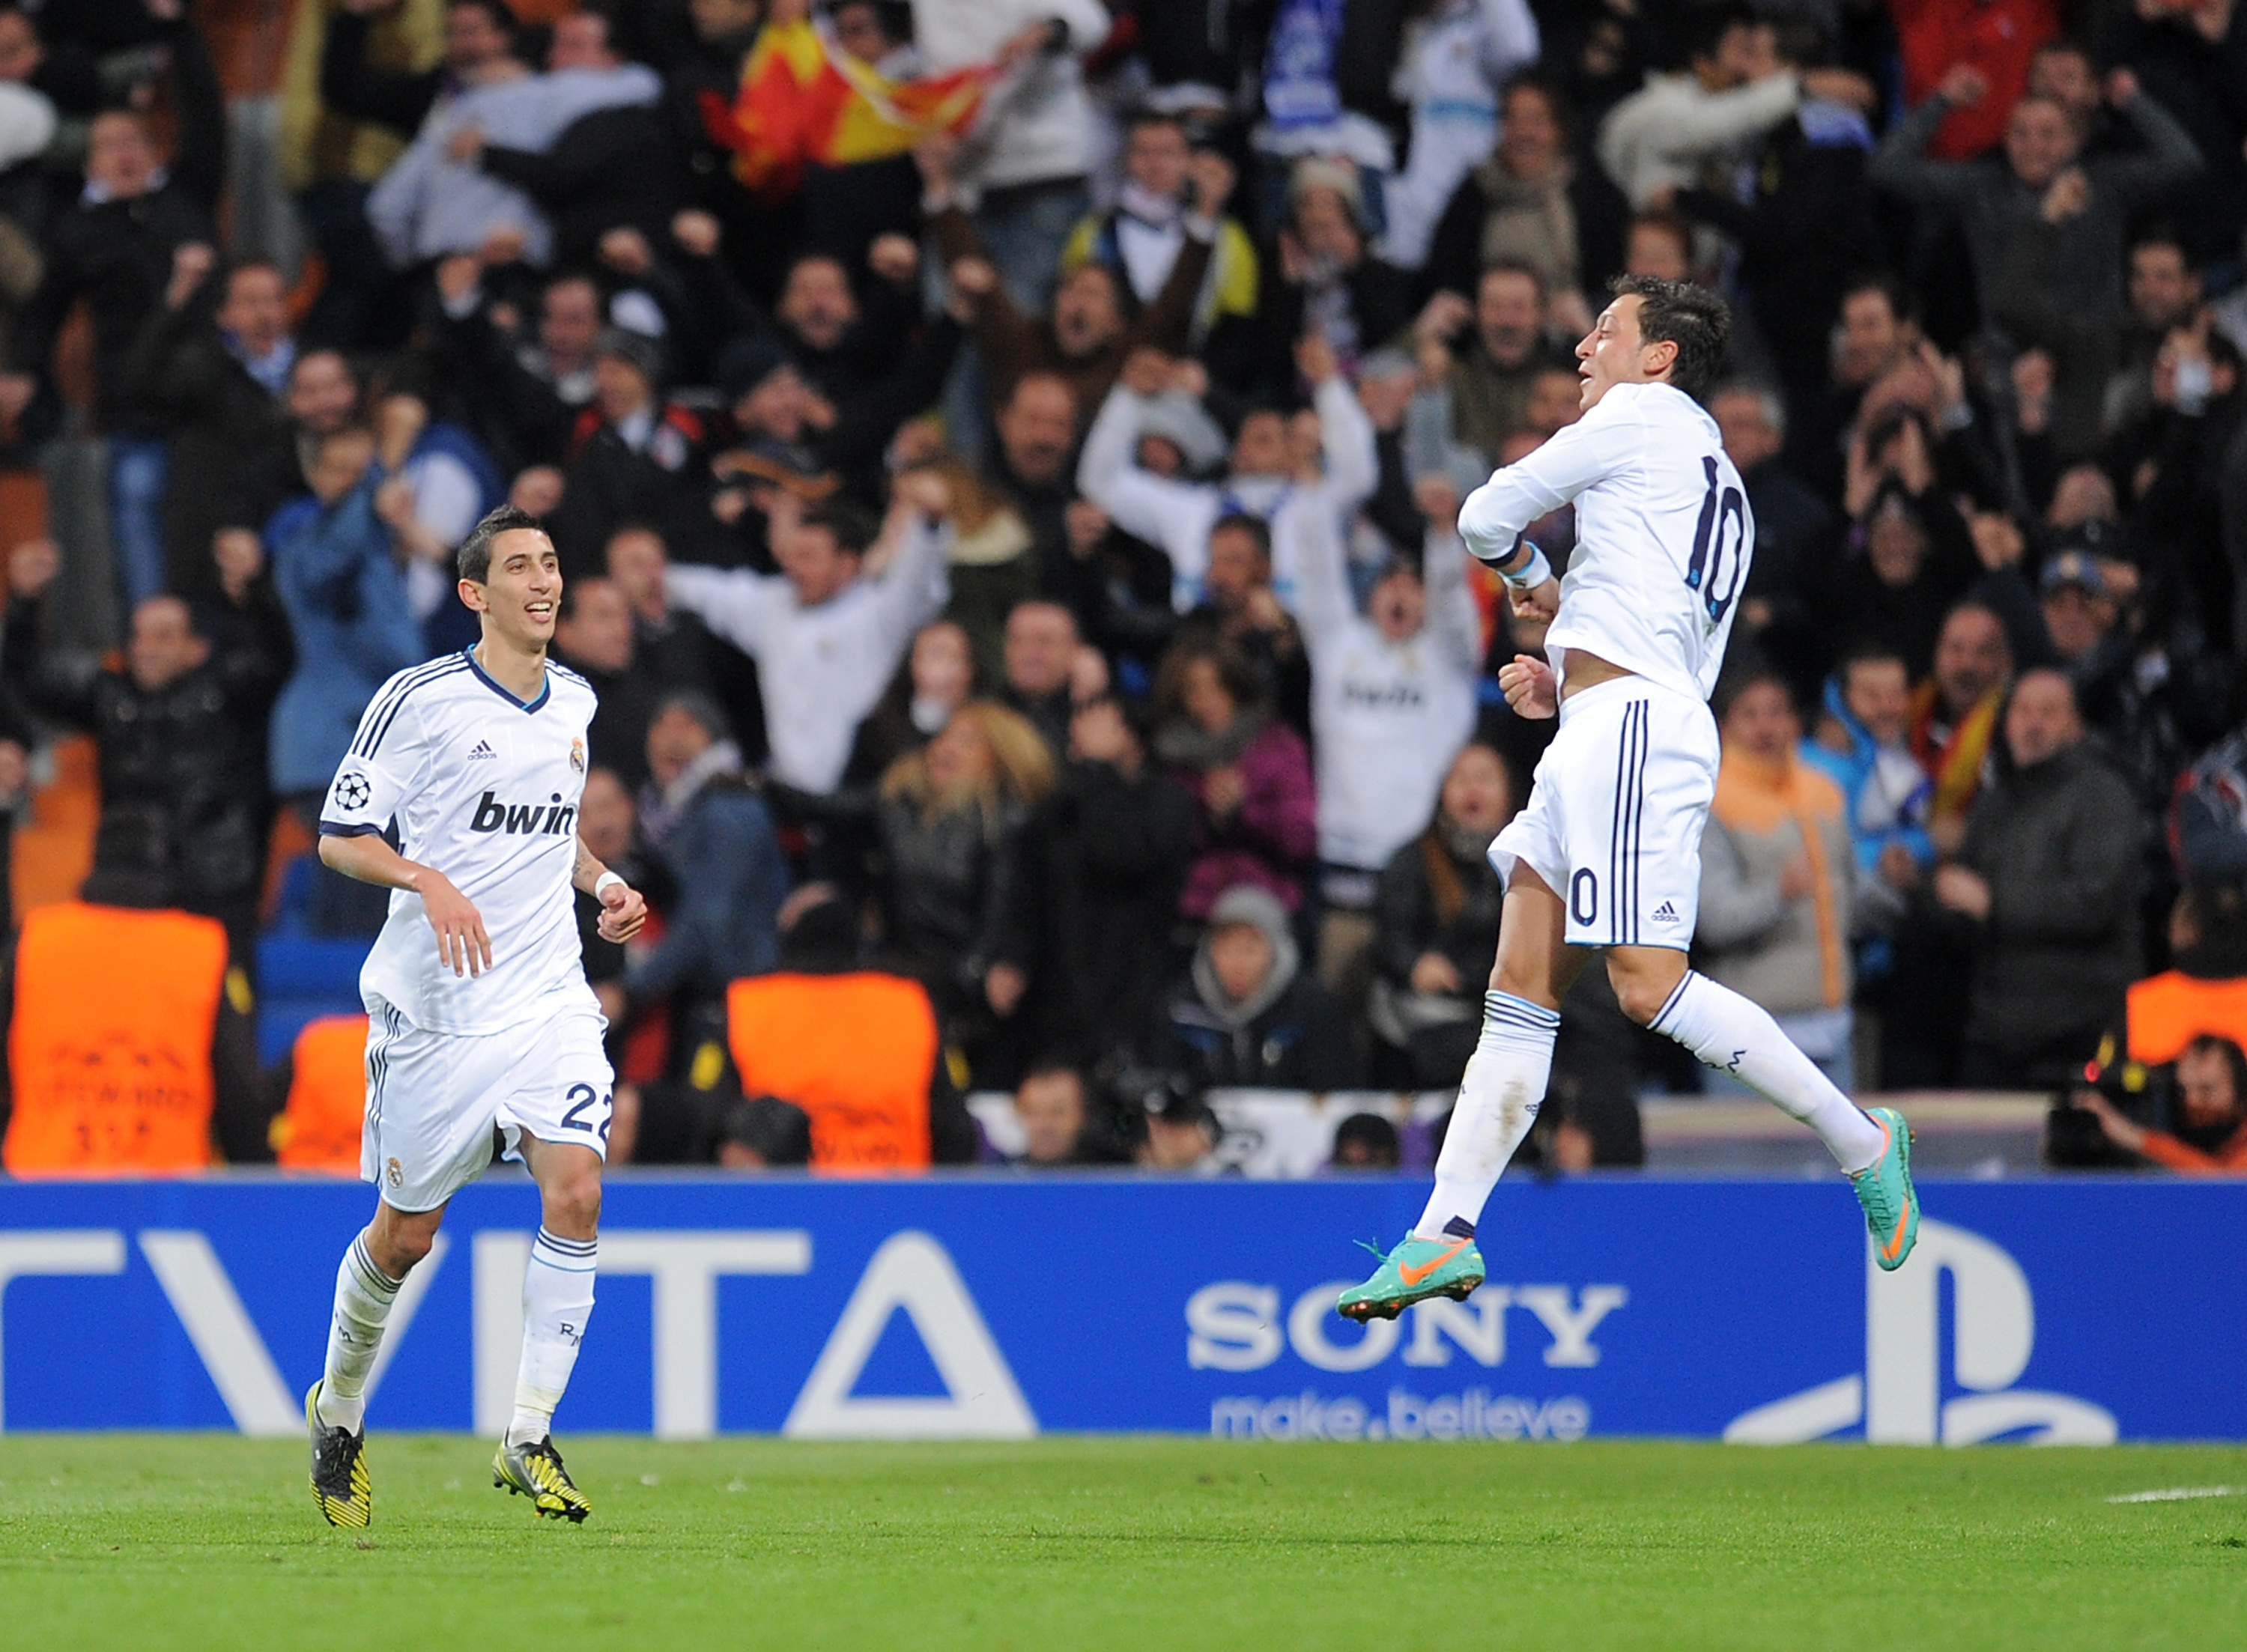 MADRID, SPAIN - NOVEMBER 06:  Mesut Ozil (R) of Real Madrid celebrates with Angel Di Maria after scoring their goal during the UEFA Champions League Group D match between Real Madrid and Borussia Dortmund at Estadio Santiago Bernabeu on November 6, 2012 in Madrid, Spain.  (Photo by Denis Doyle/Getty Images)